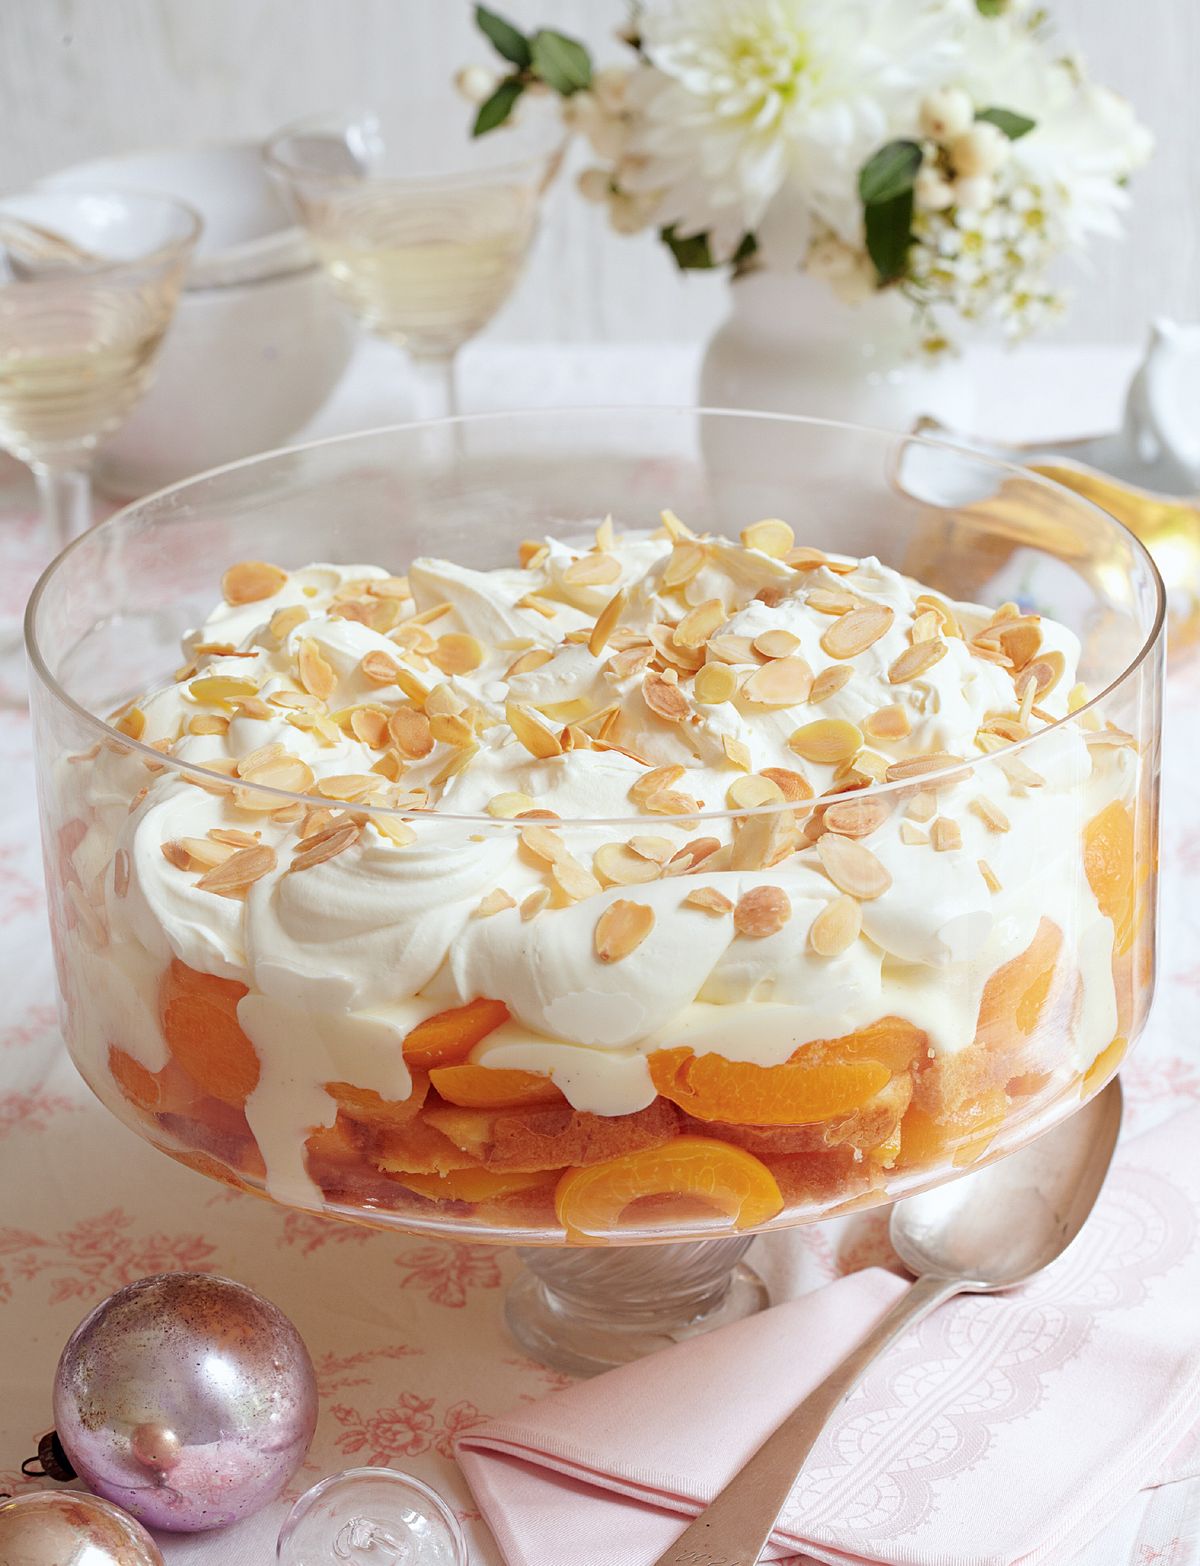 Cheat’s Christmas Apricot Trifle